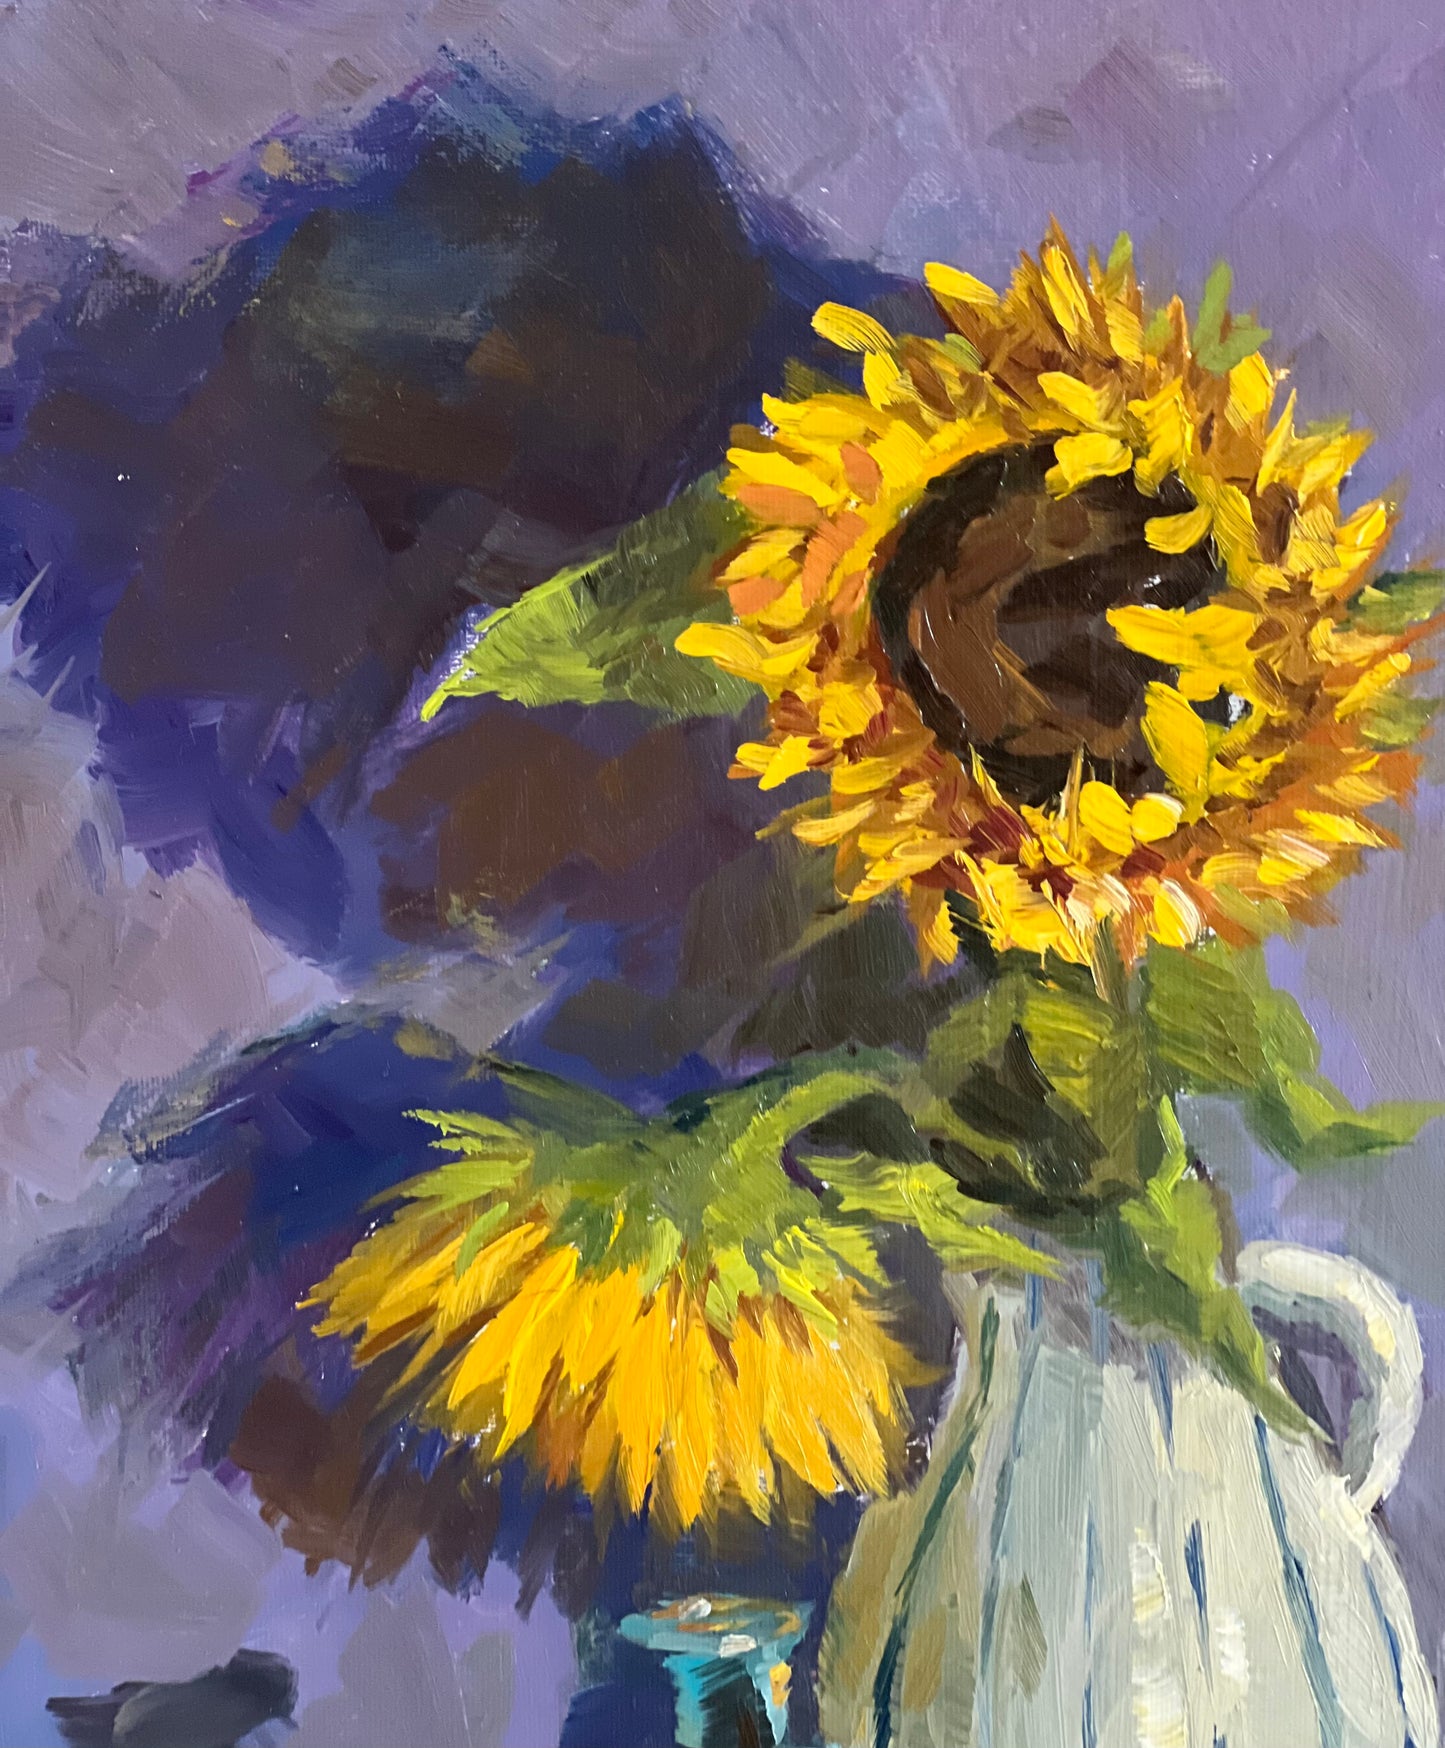 Sunflower Series 9 - Original Stilllife Painting, 8 by 12 inches